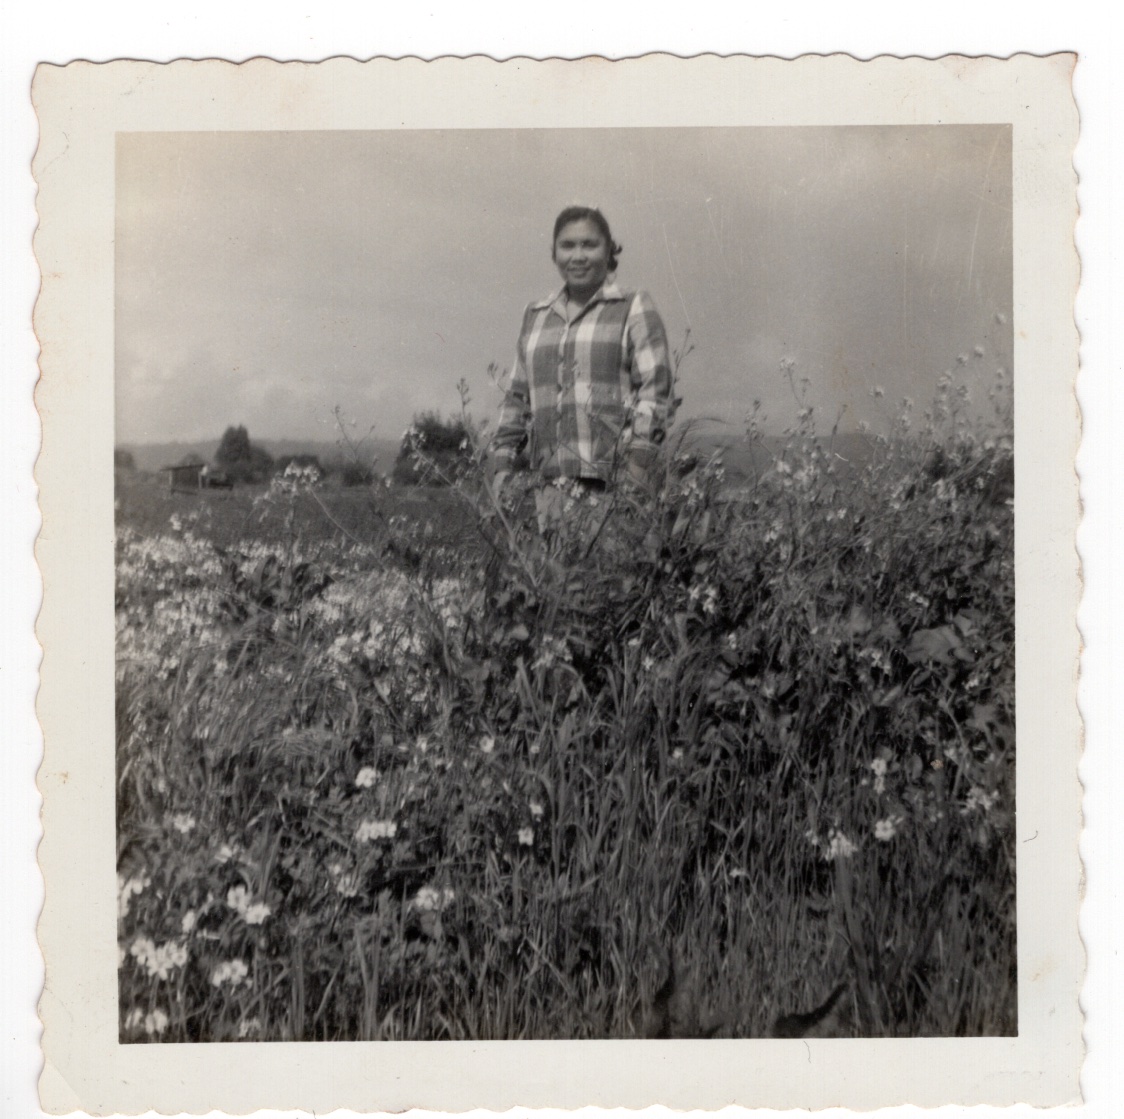 Square black and white photograph of a woman wearing a plaid shirt, standing in a field of wildflowers.